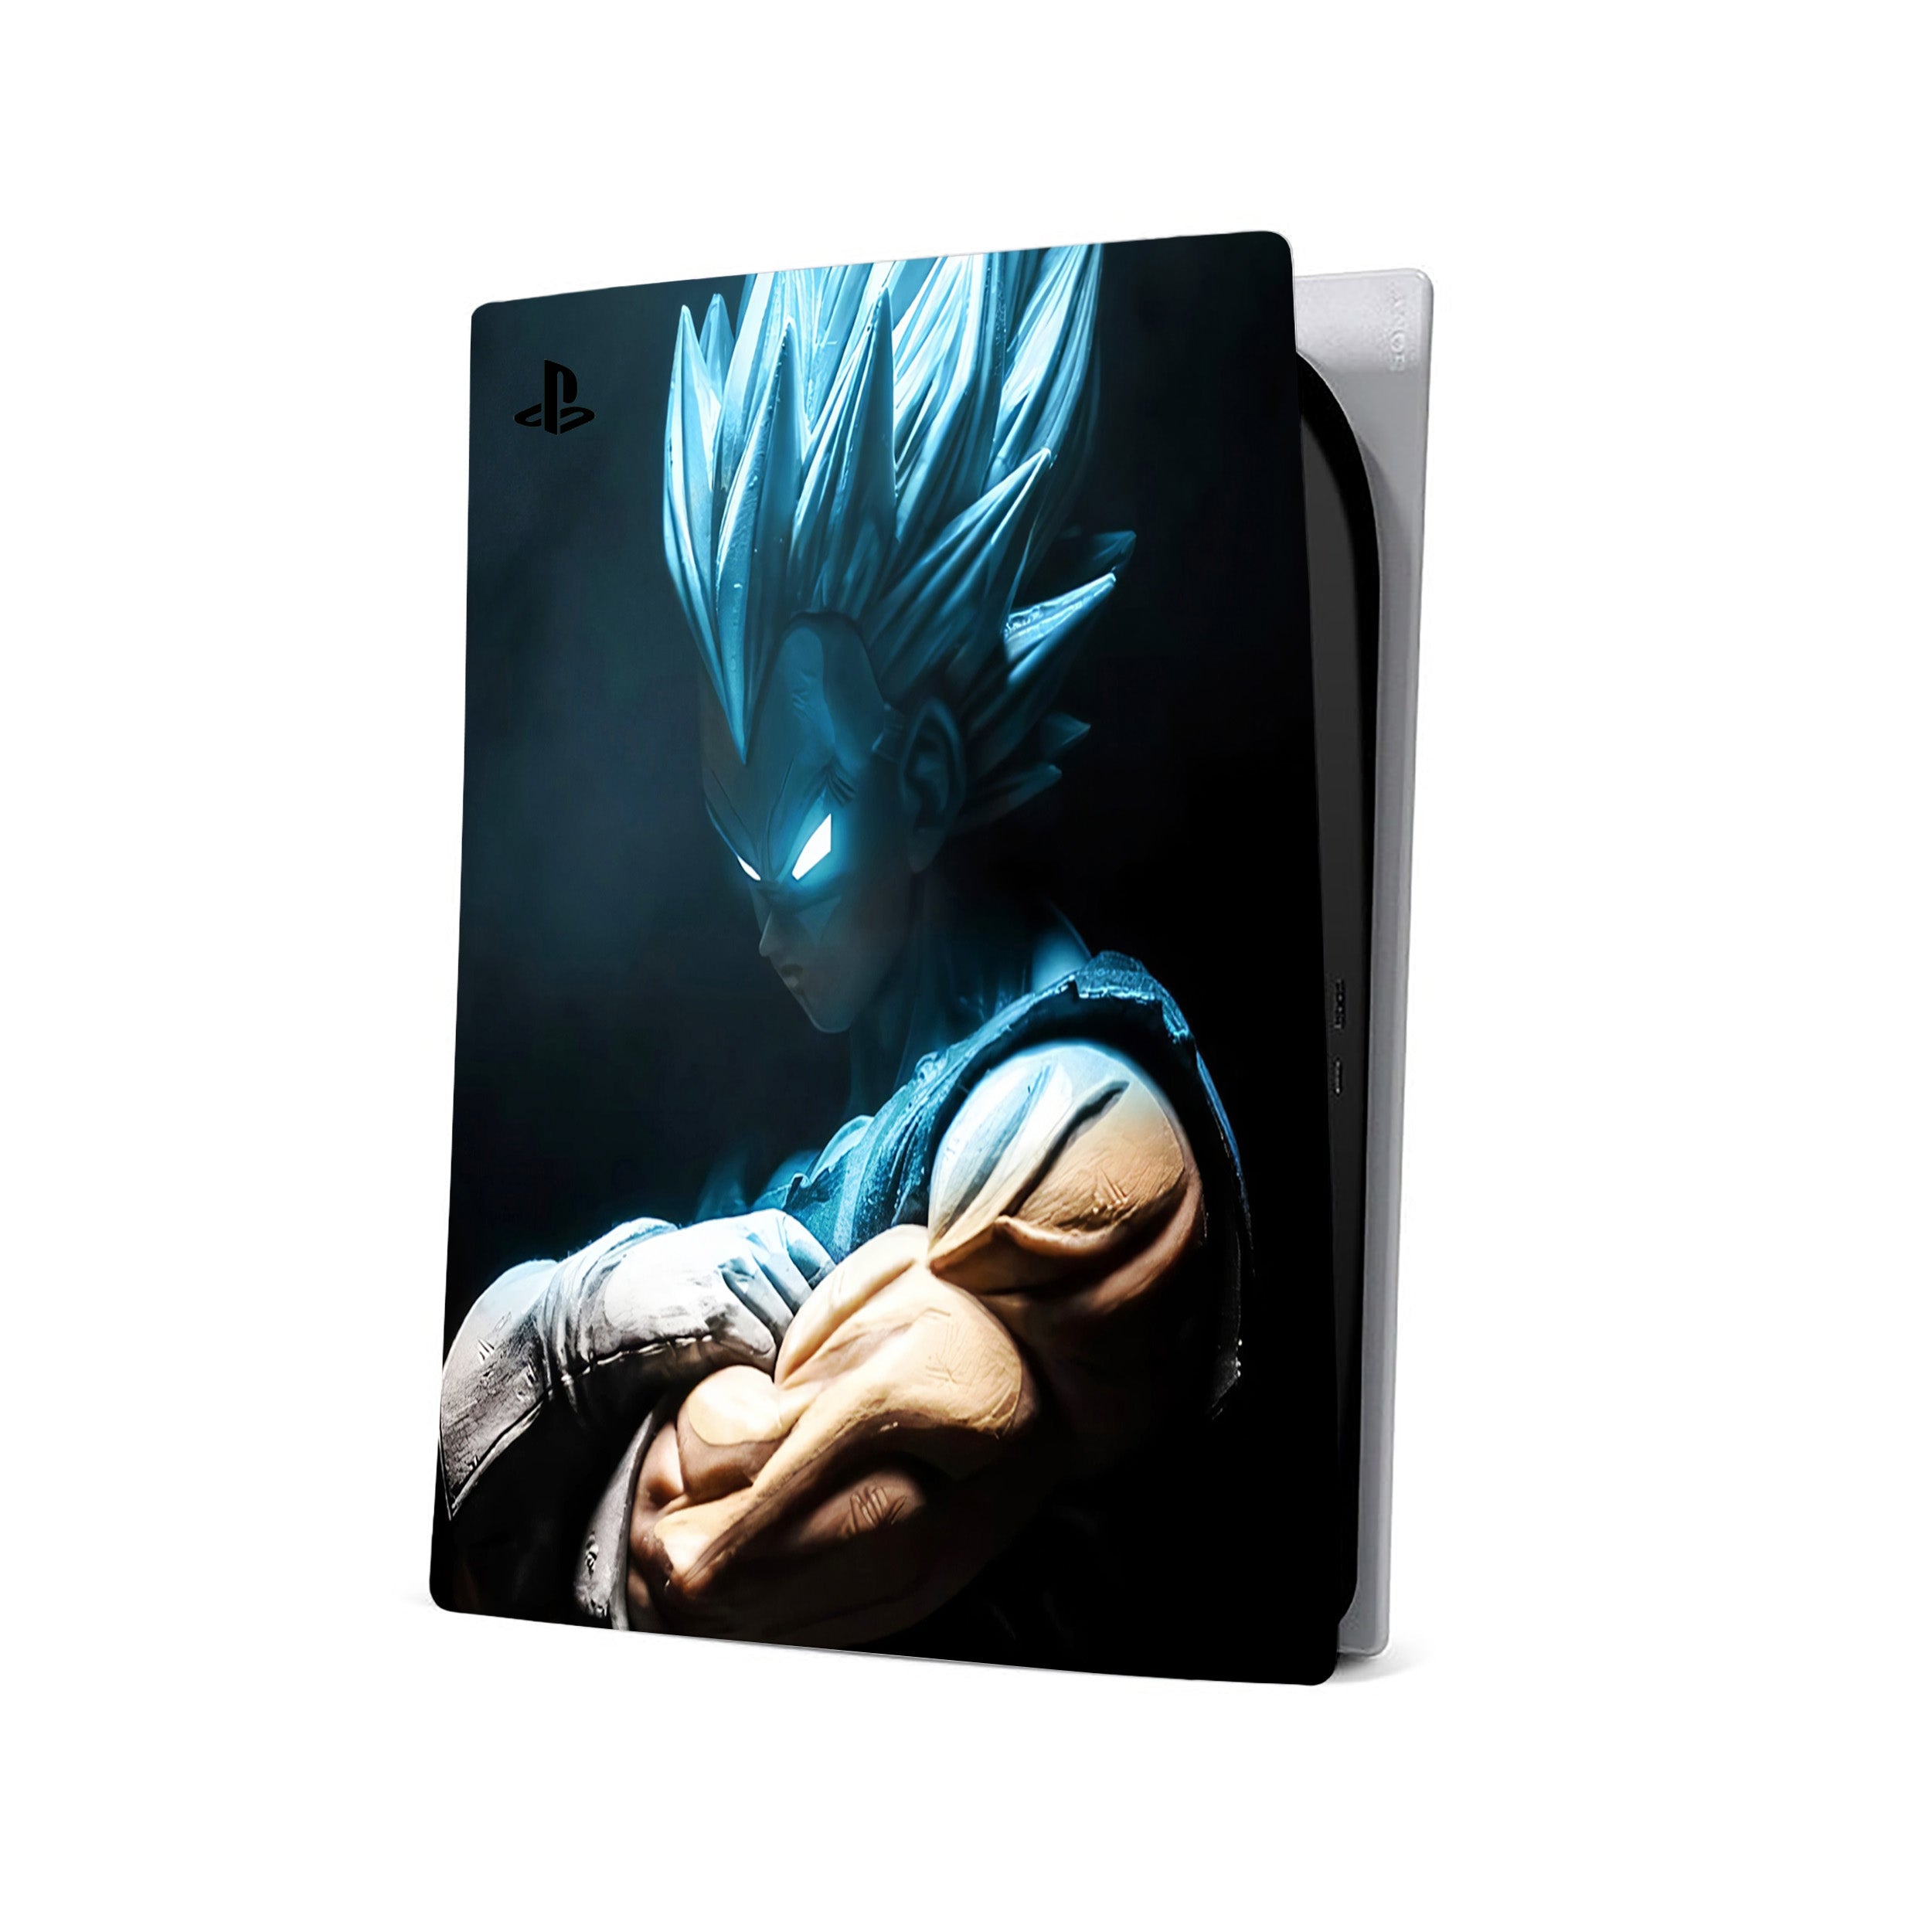 A video game skin featuring a Dragon Ball Super Vegeta design for the PS5.